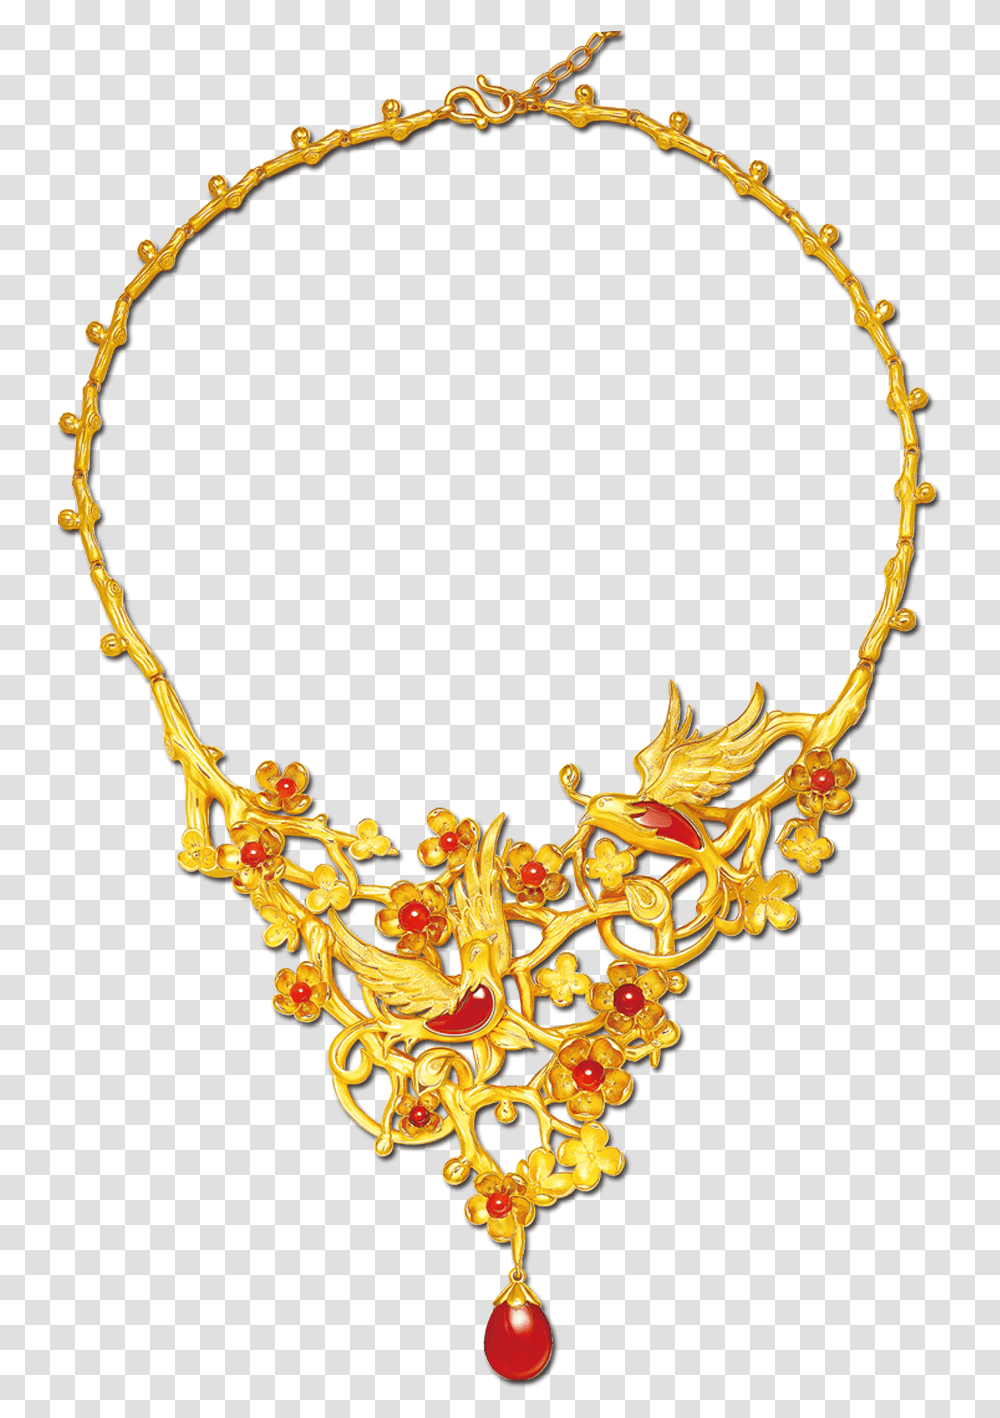 Necklace Gold Jewellery Fashion Accessory Gold Necklace Background Jewellery, Jewelry, Accessories, Pendant Transparent Png